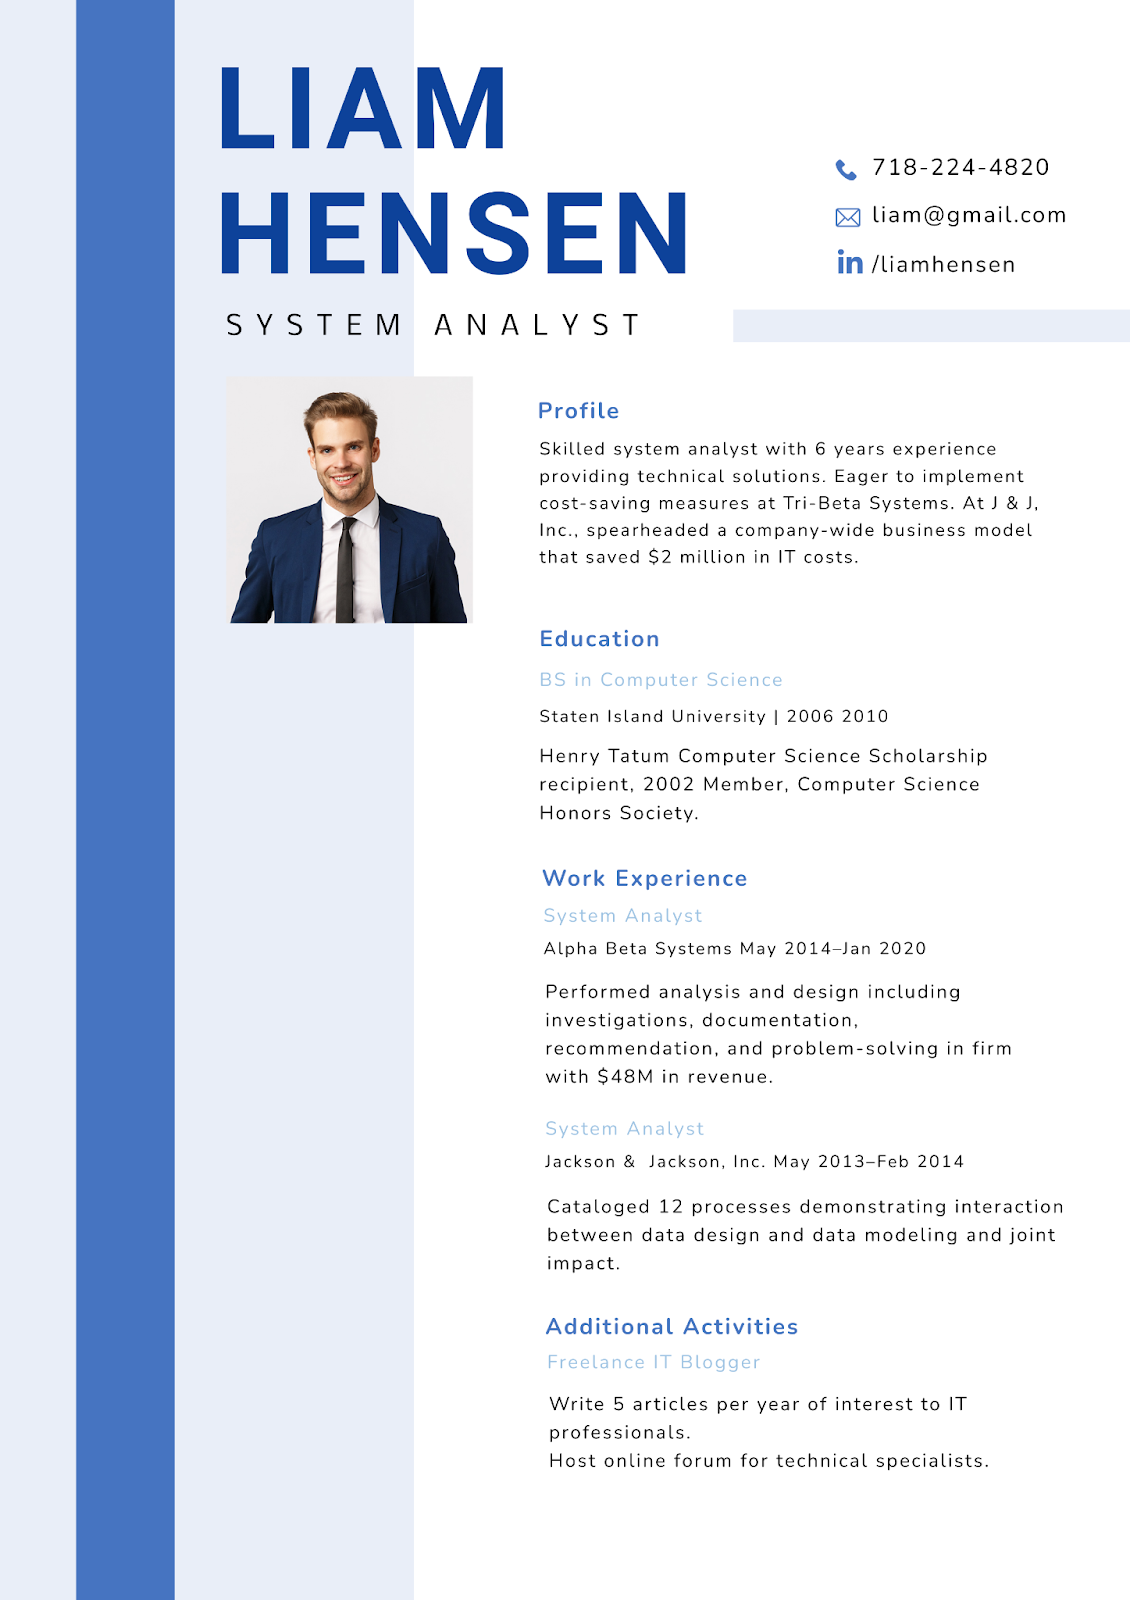 System Analyst Resume Template by DocHipo